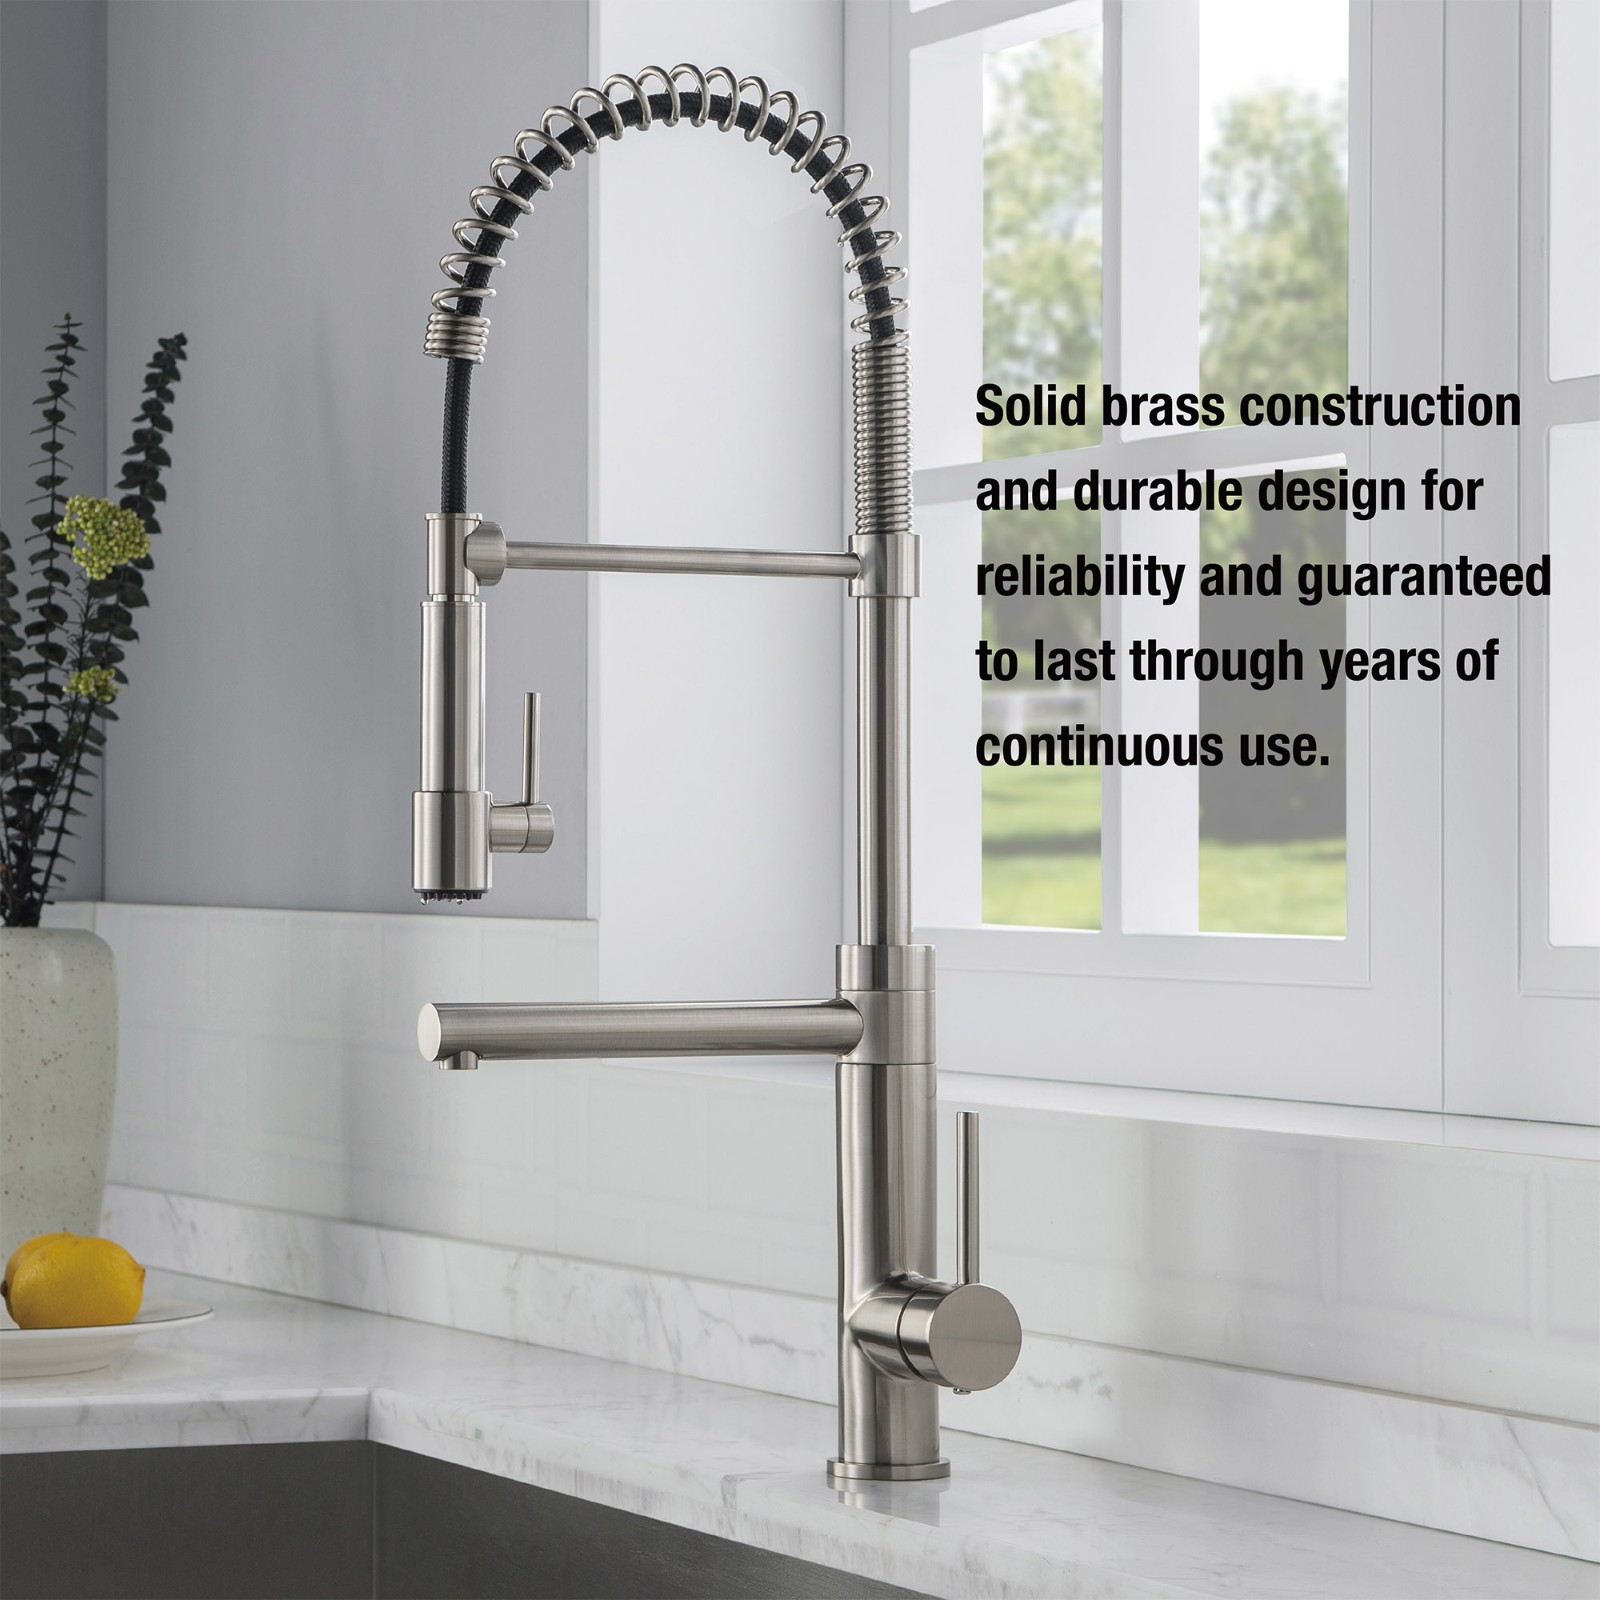  WOODBRIDGE WK060501BN Stainless Steel Single Handle Pre-Rinse Pull Down Kitchen Faucet and Pot Filler in Brushed Nickel Finish._5234